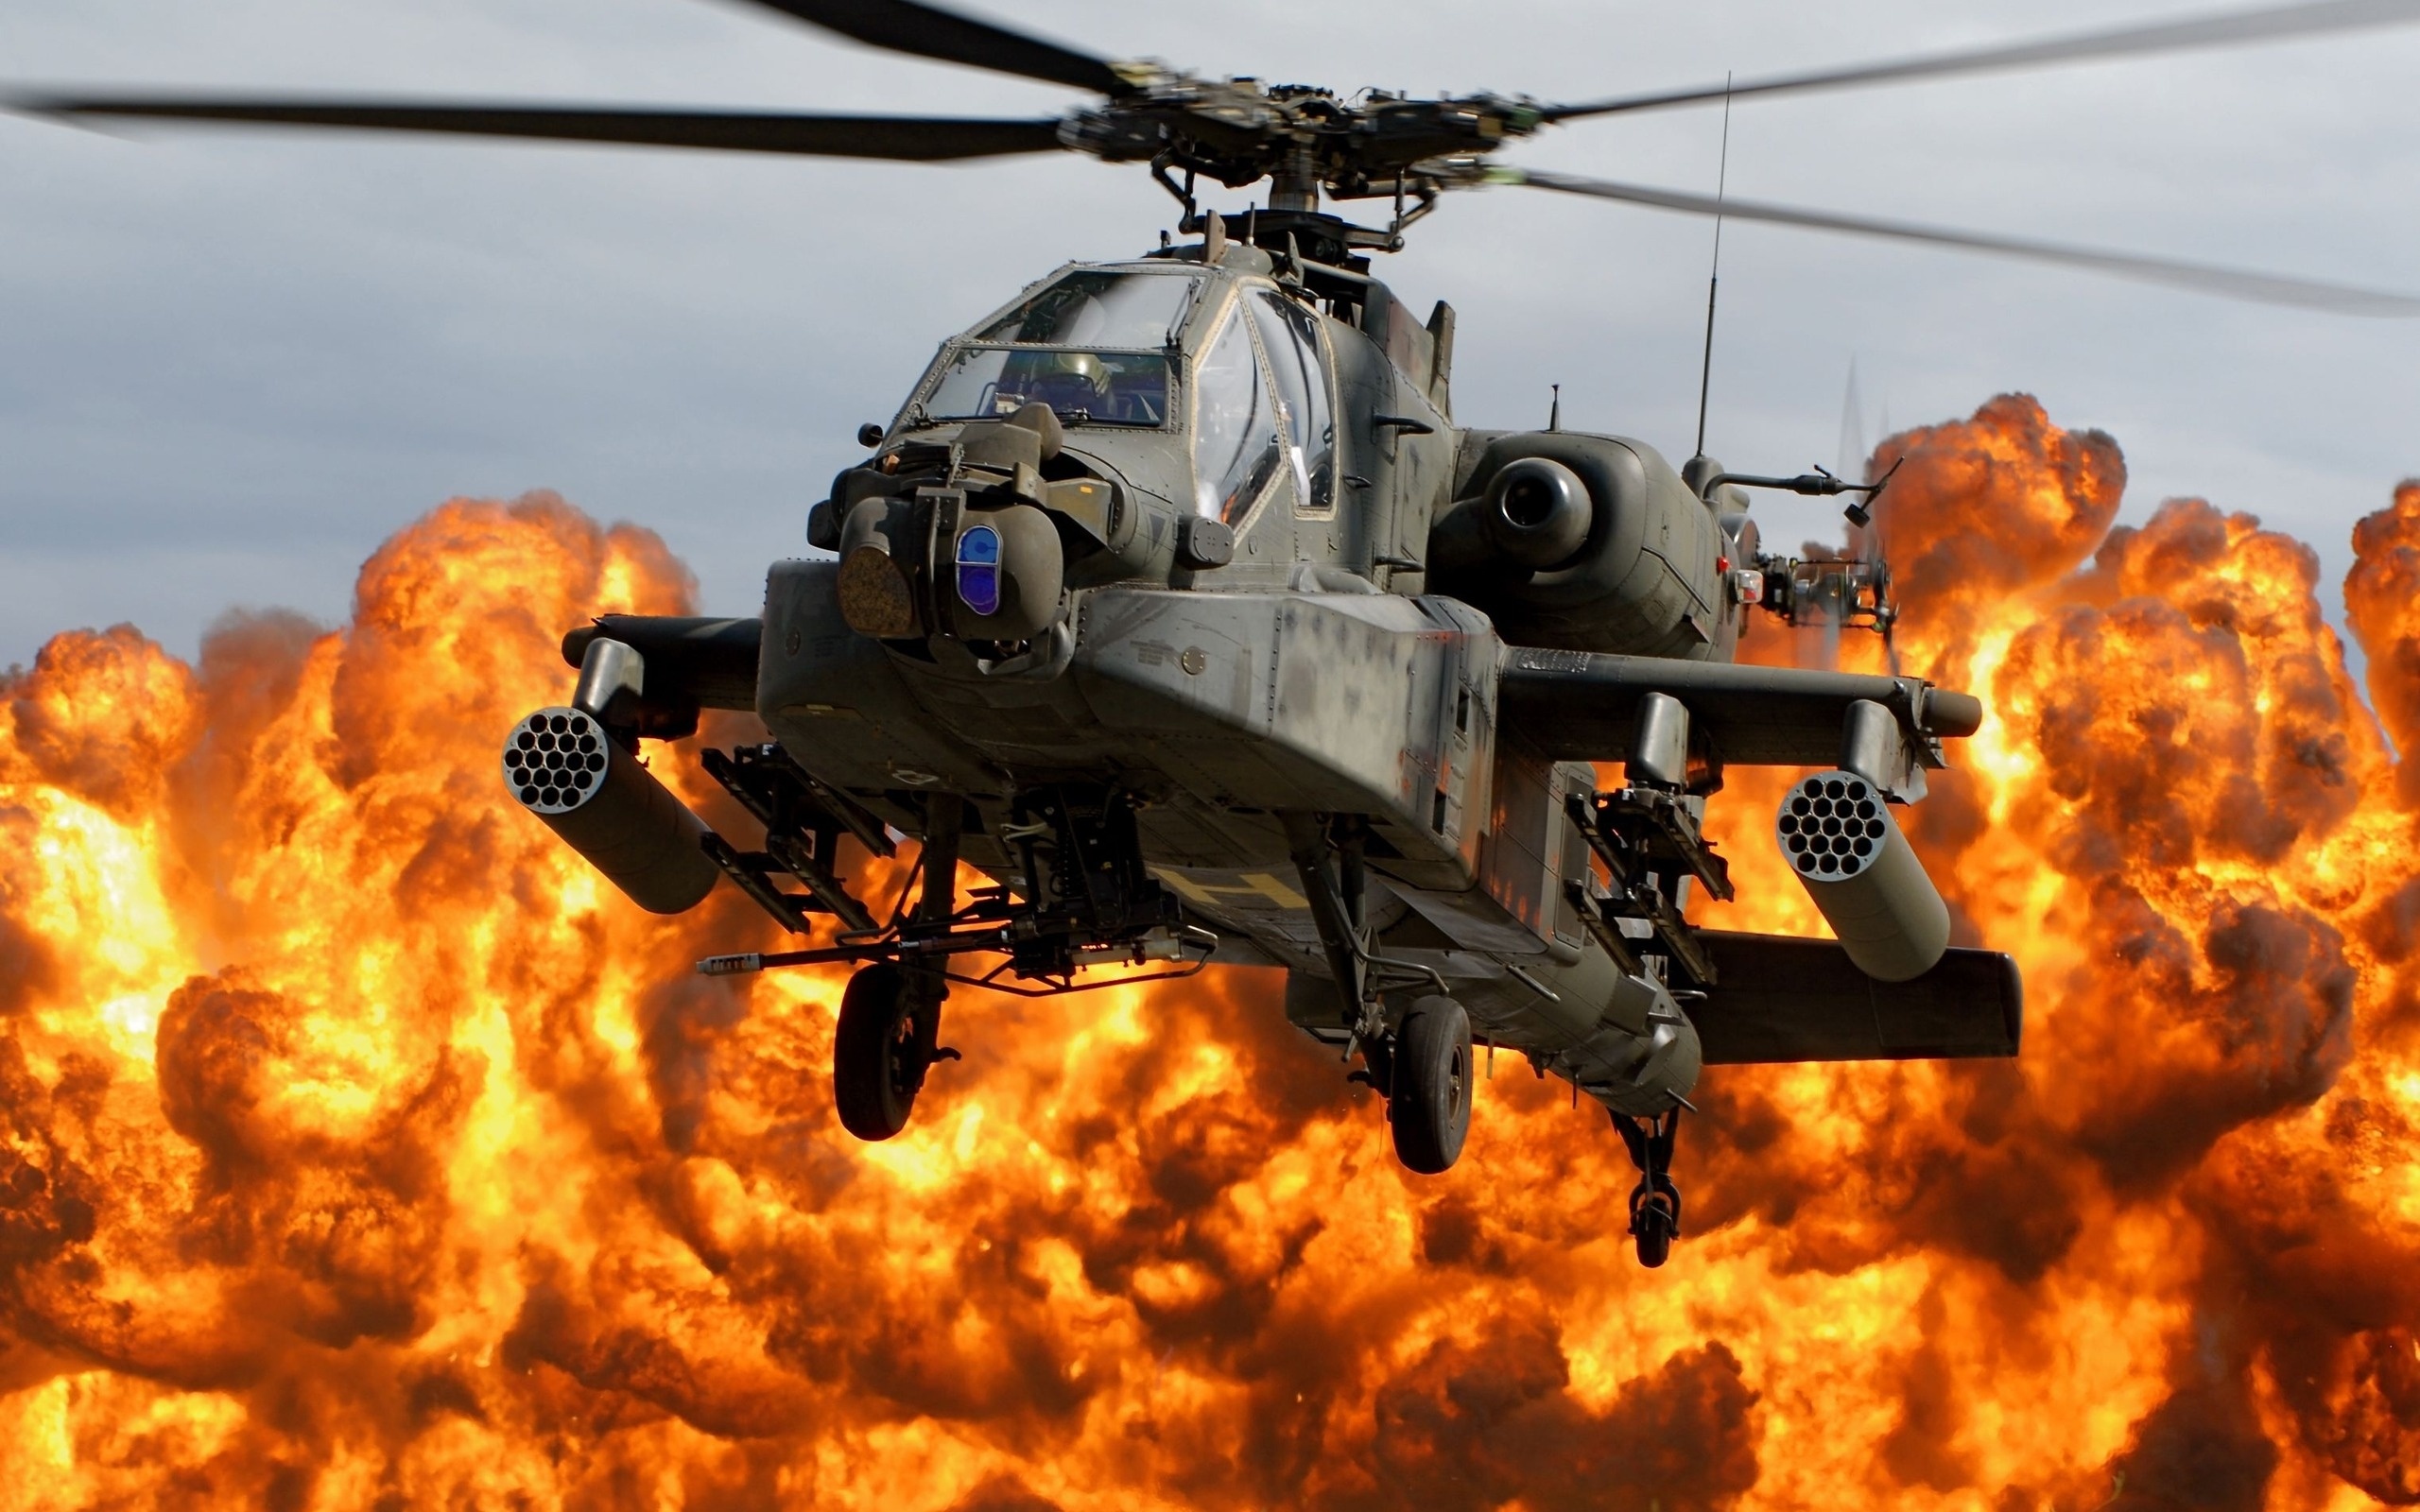 Boeing AH-64 Apache military helicopter on desktop wallpaper.